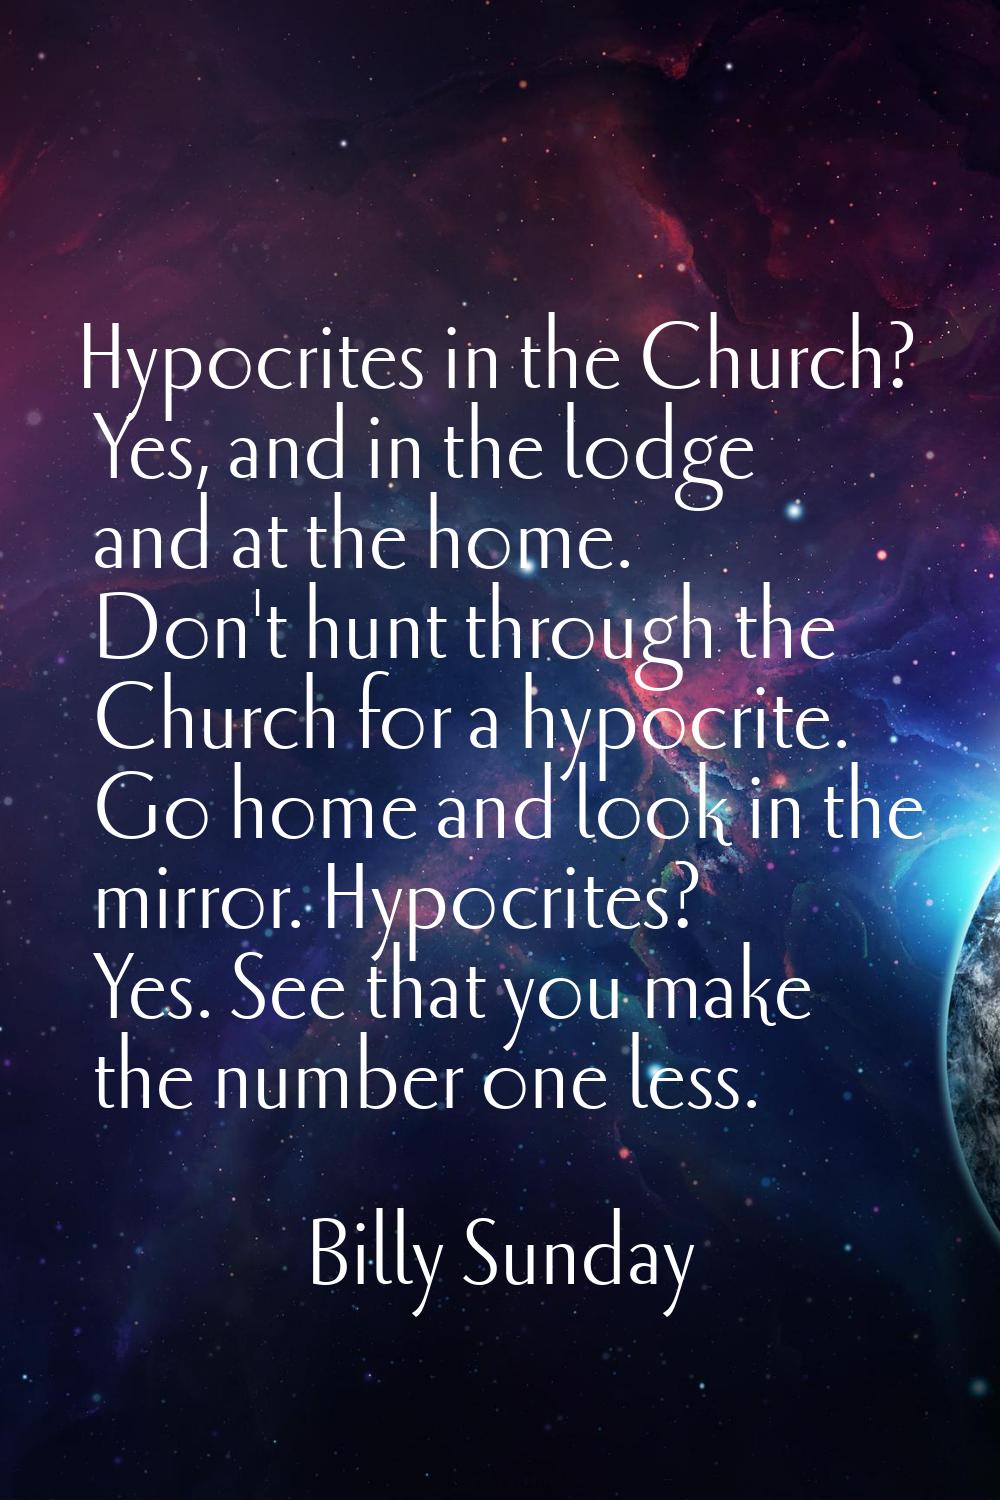 Hypocrites in the Church? Yes, and in the lodge and at the home. Don't hunt through the Church for 